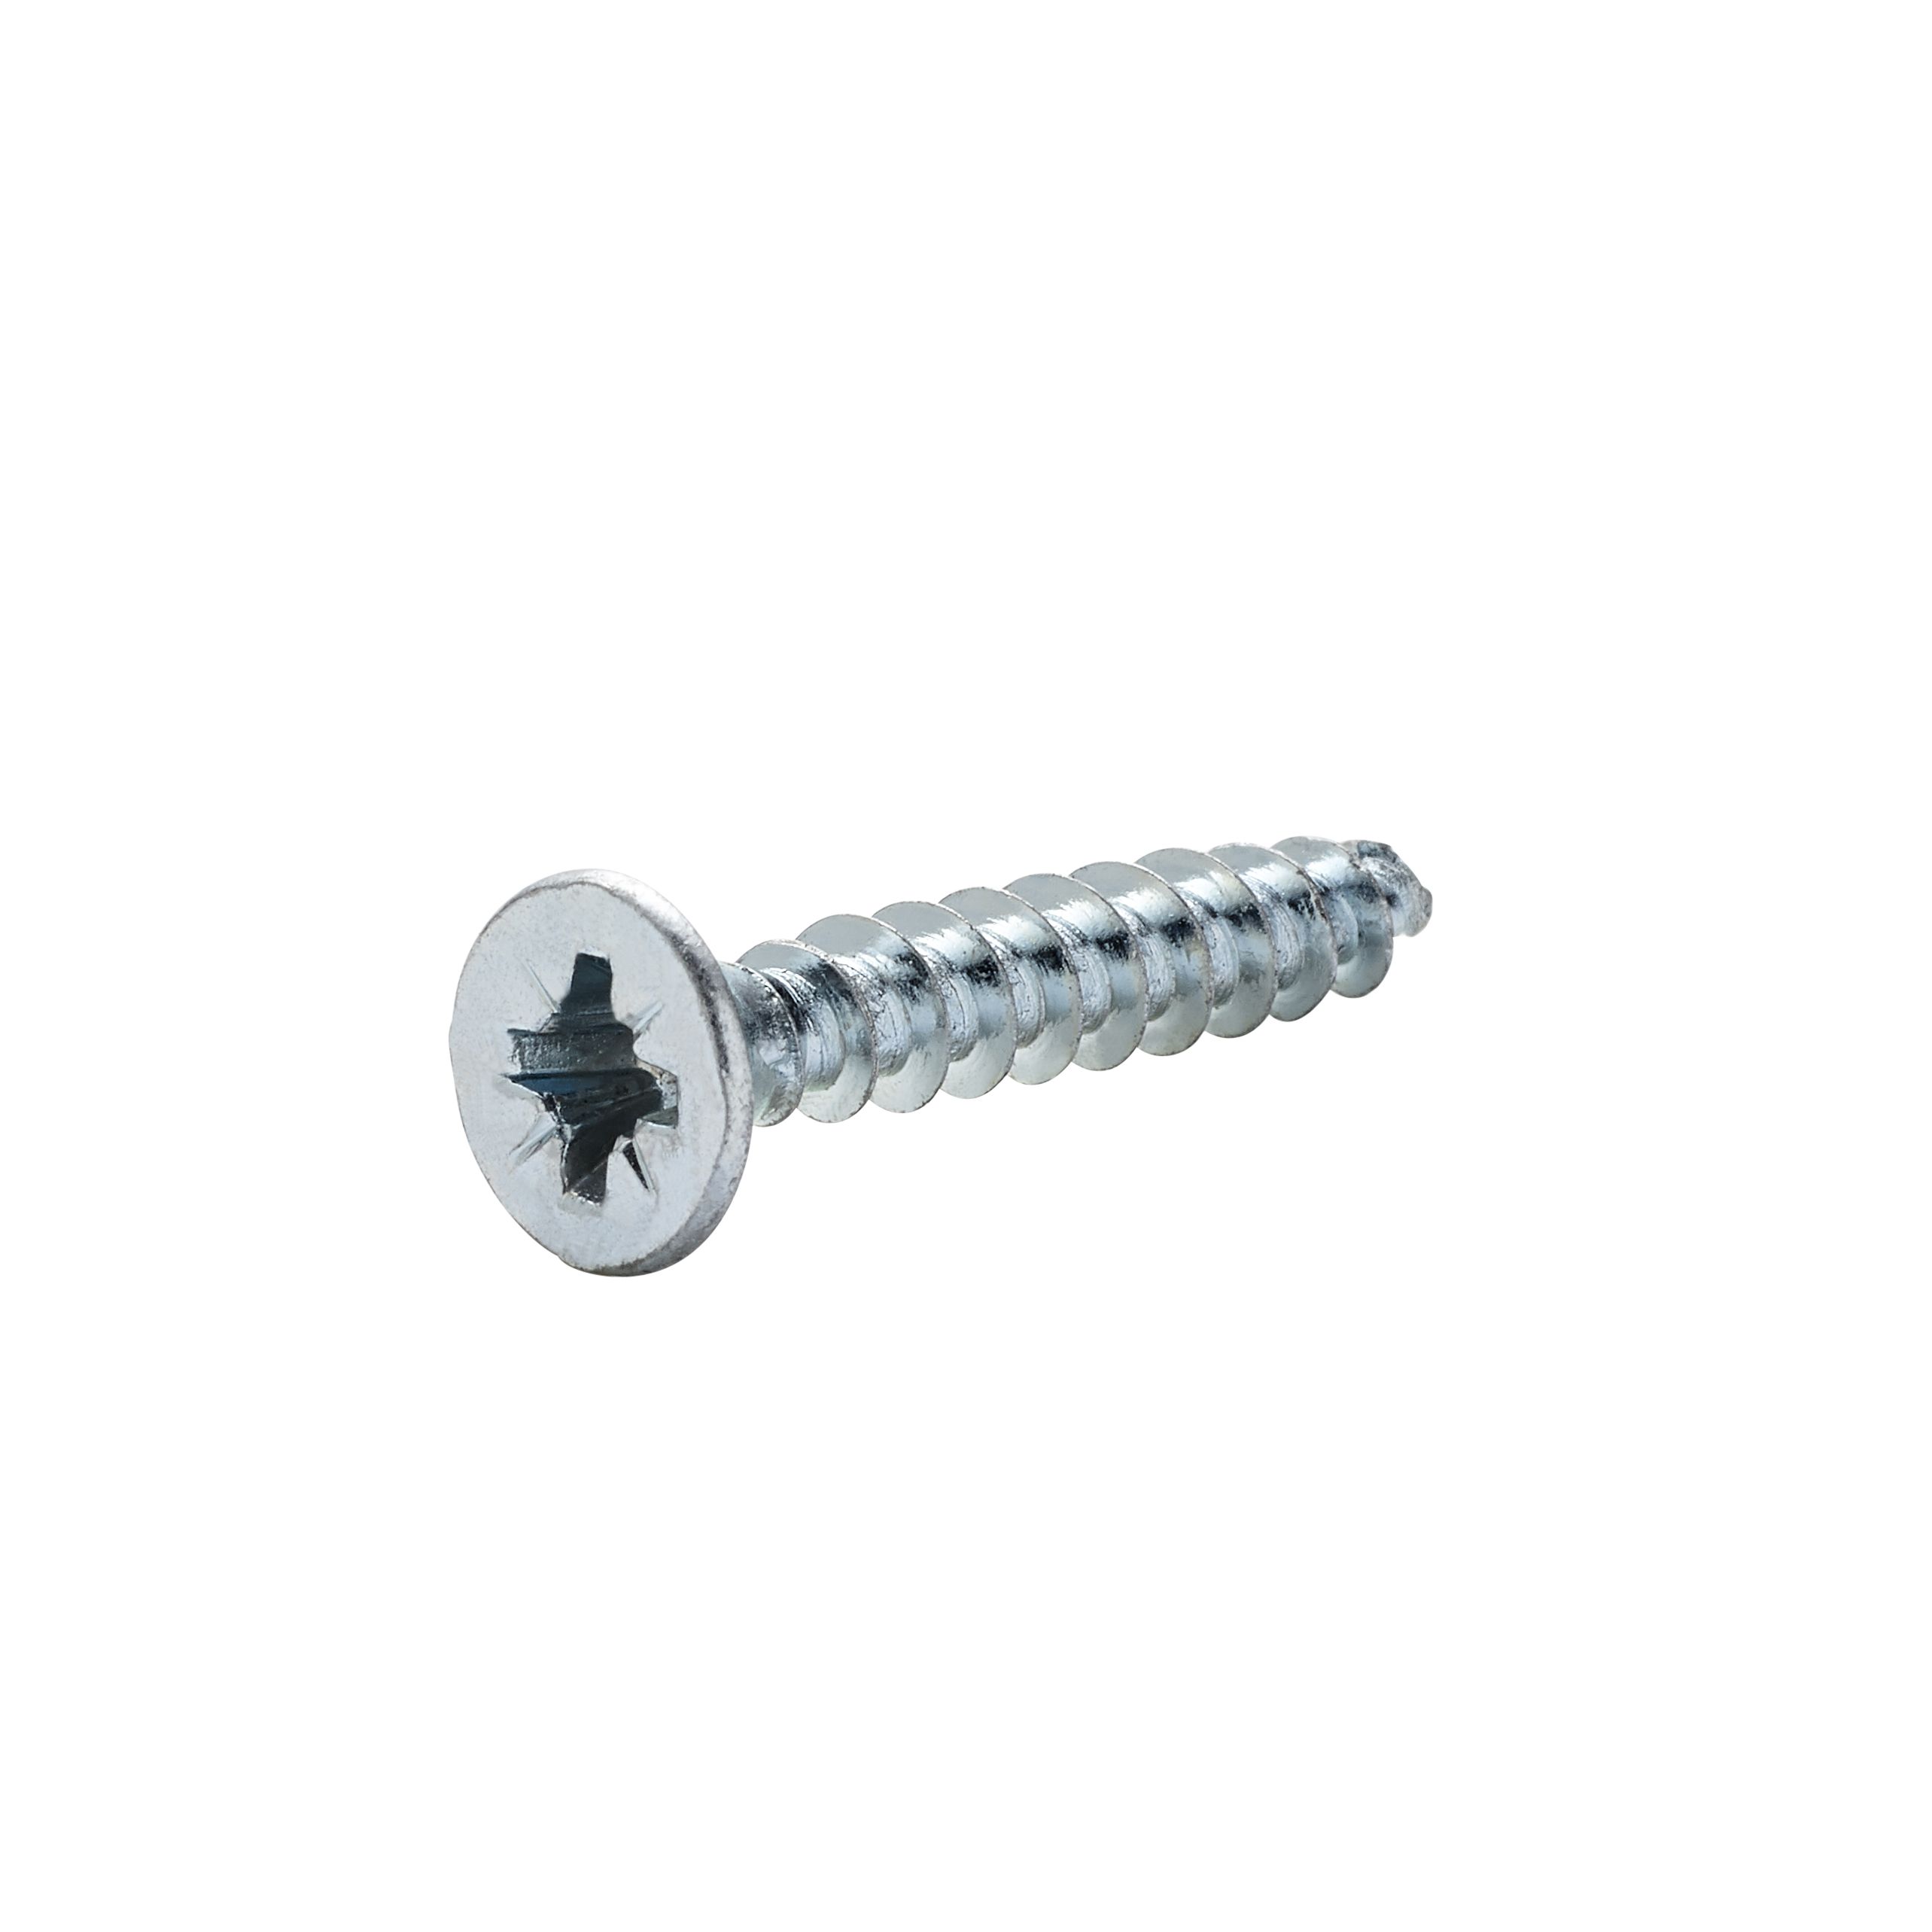 Diall Zinc-plated Carbon steel Screw (Dia)4mm (L)25mm, Pack of 20